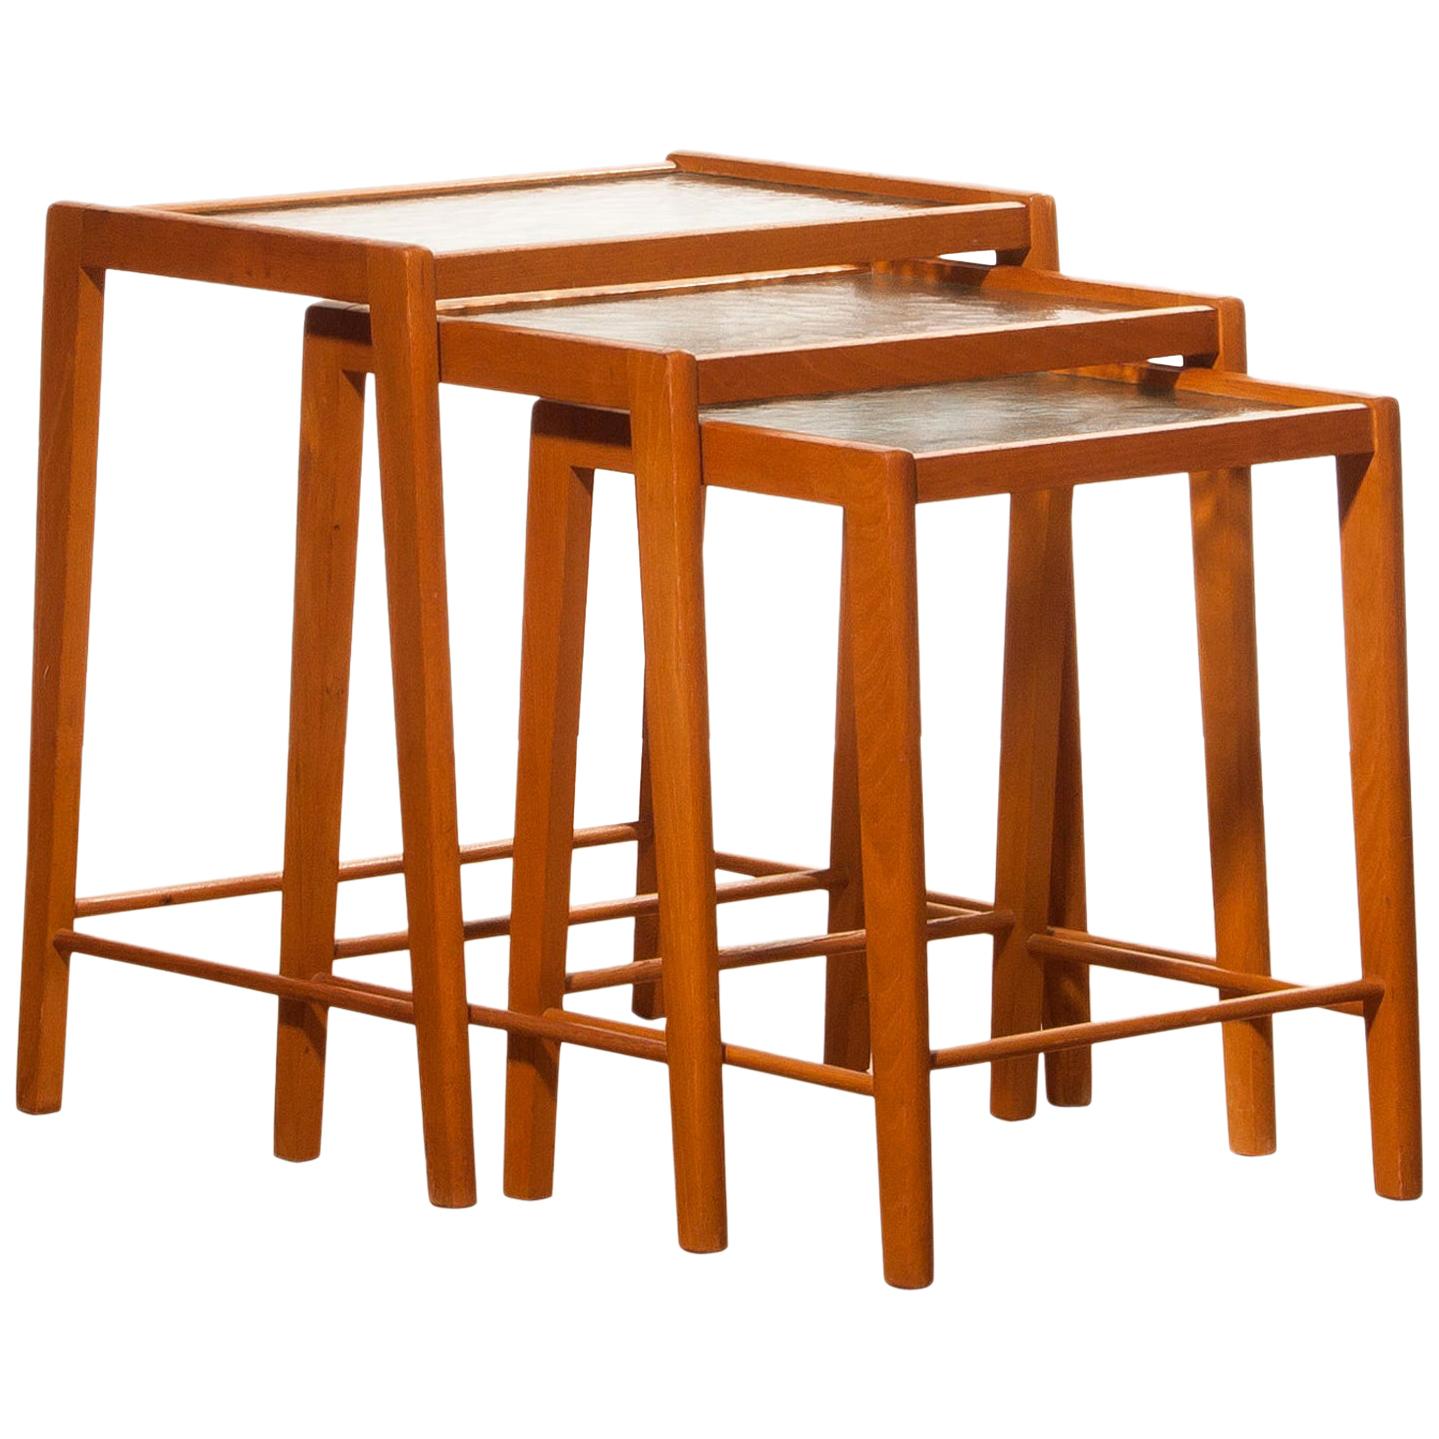 A lovely set of three nesting tables.
This beautiful set is made of beech with glass tops.
They are in very nice condition.
Period: 1960s.
Dimensions: H 50 cm, W 46 cm, D 31 cm
H 46 cm, W 41 cm, D 29 cm
H 42 cm, W 36 cm, D 27 cm.

  